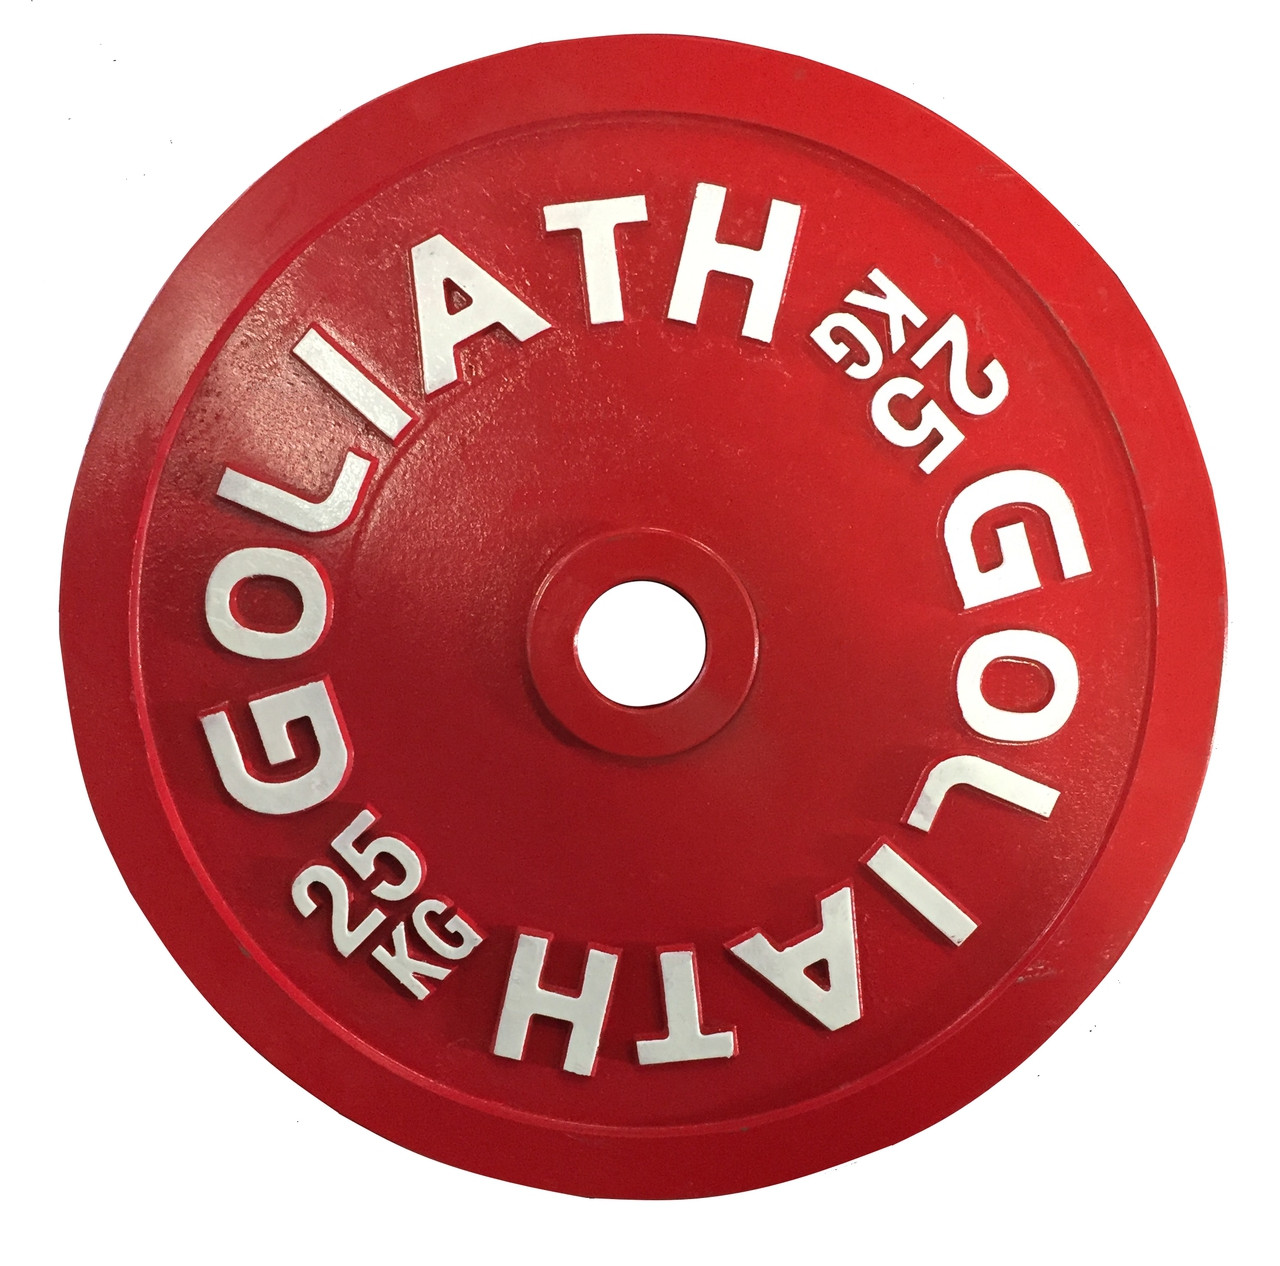 Goliath Calibrated Powerlifting Plate - 25kg (PAIR)